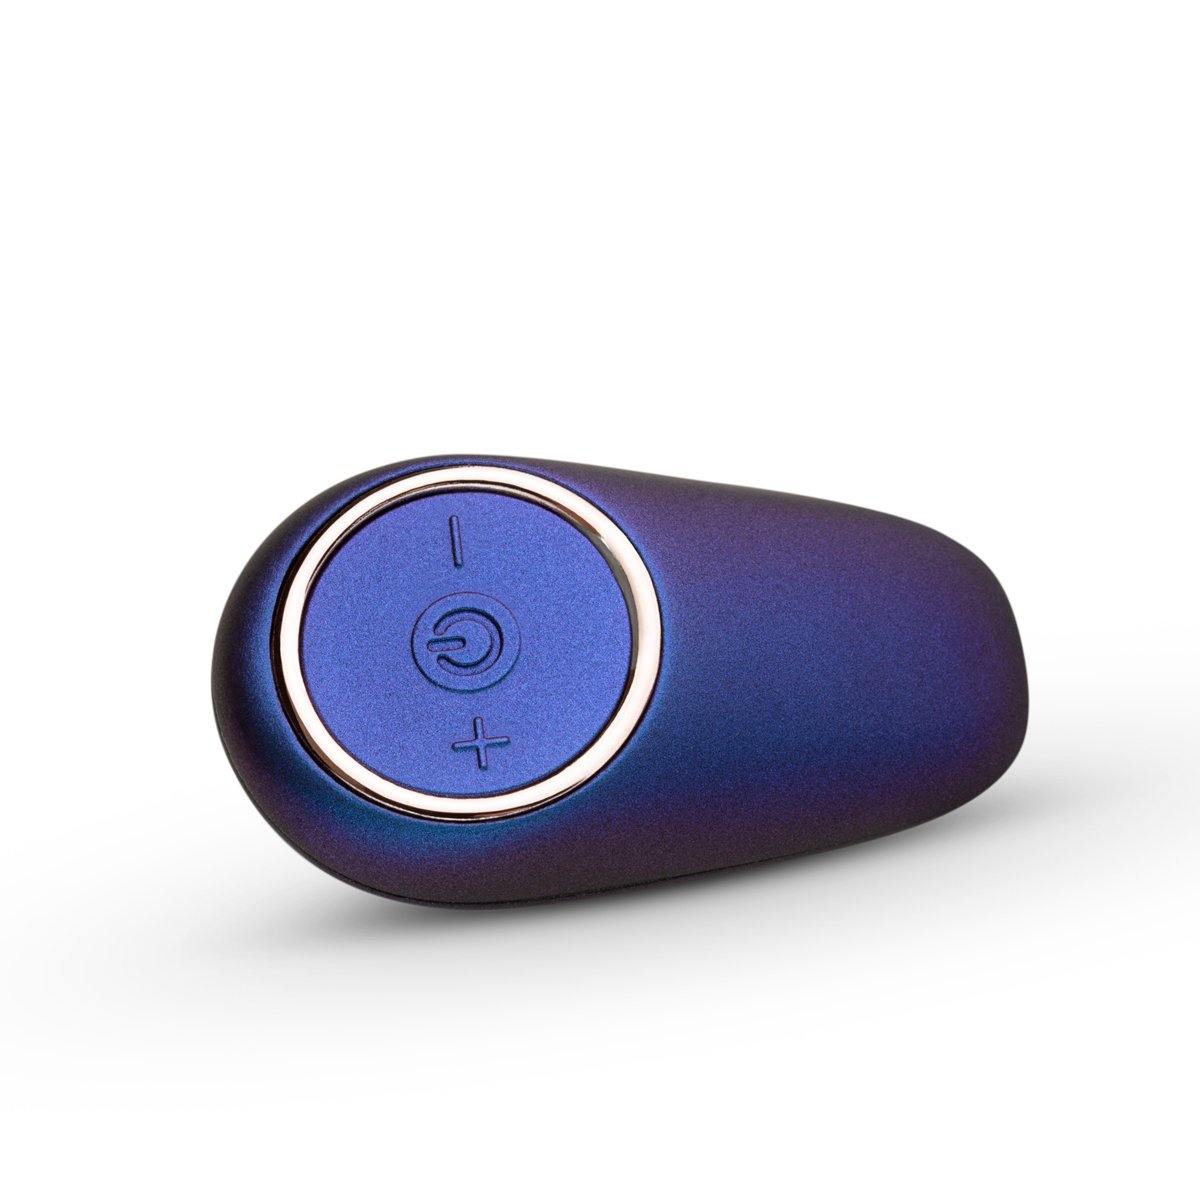 Hueman Neptune Vibrating Cock Ring + Remote - Buy At Luxury Toy X - Free 3-Day Shipping